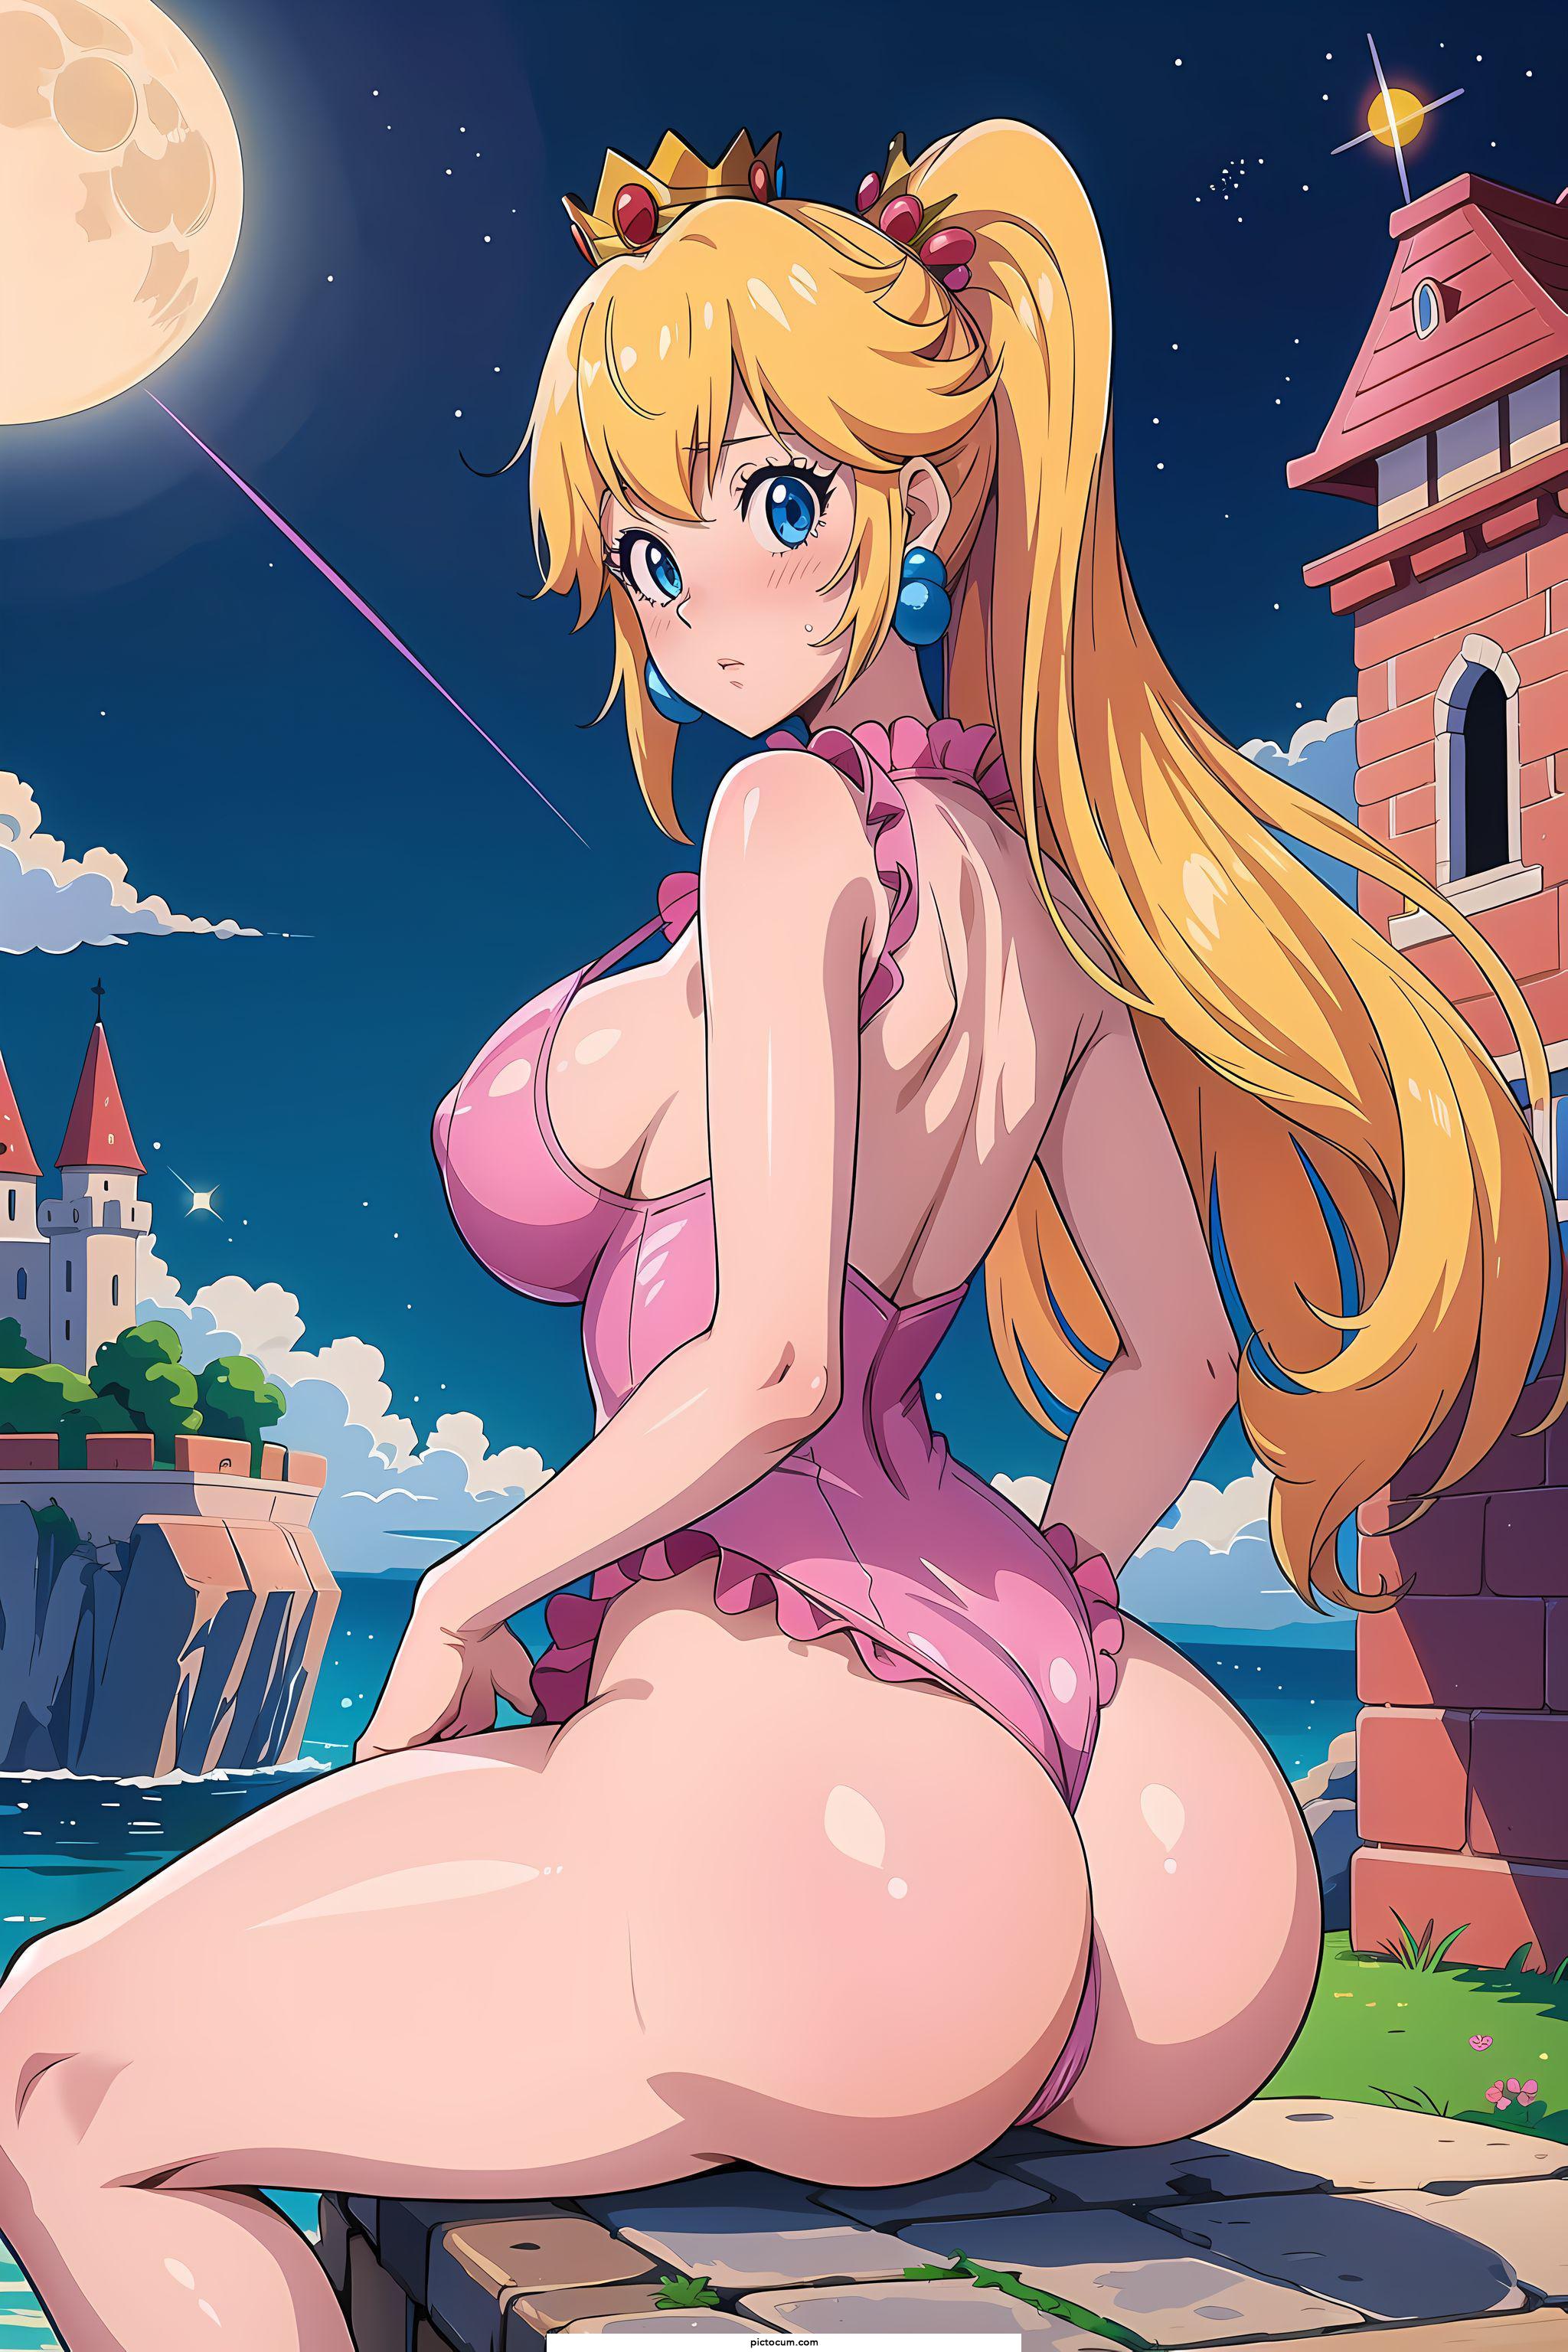 ''It's a nice castle right Mario? I love the view here!'' 👑